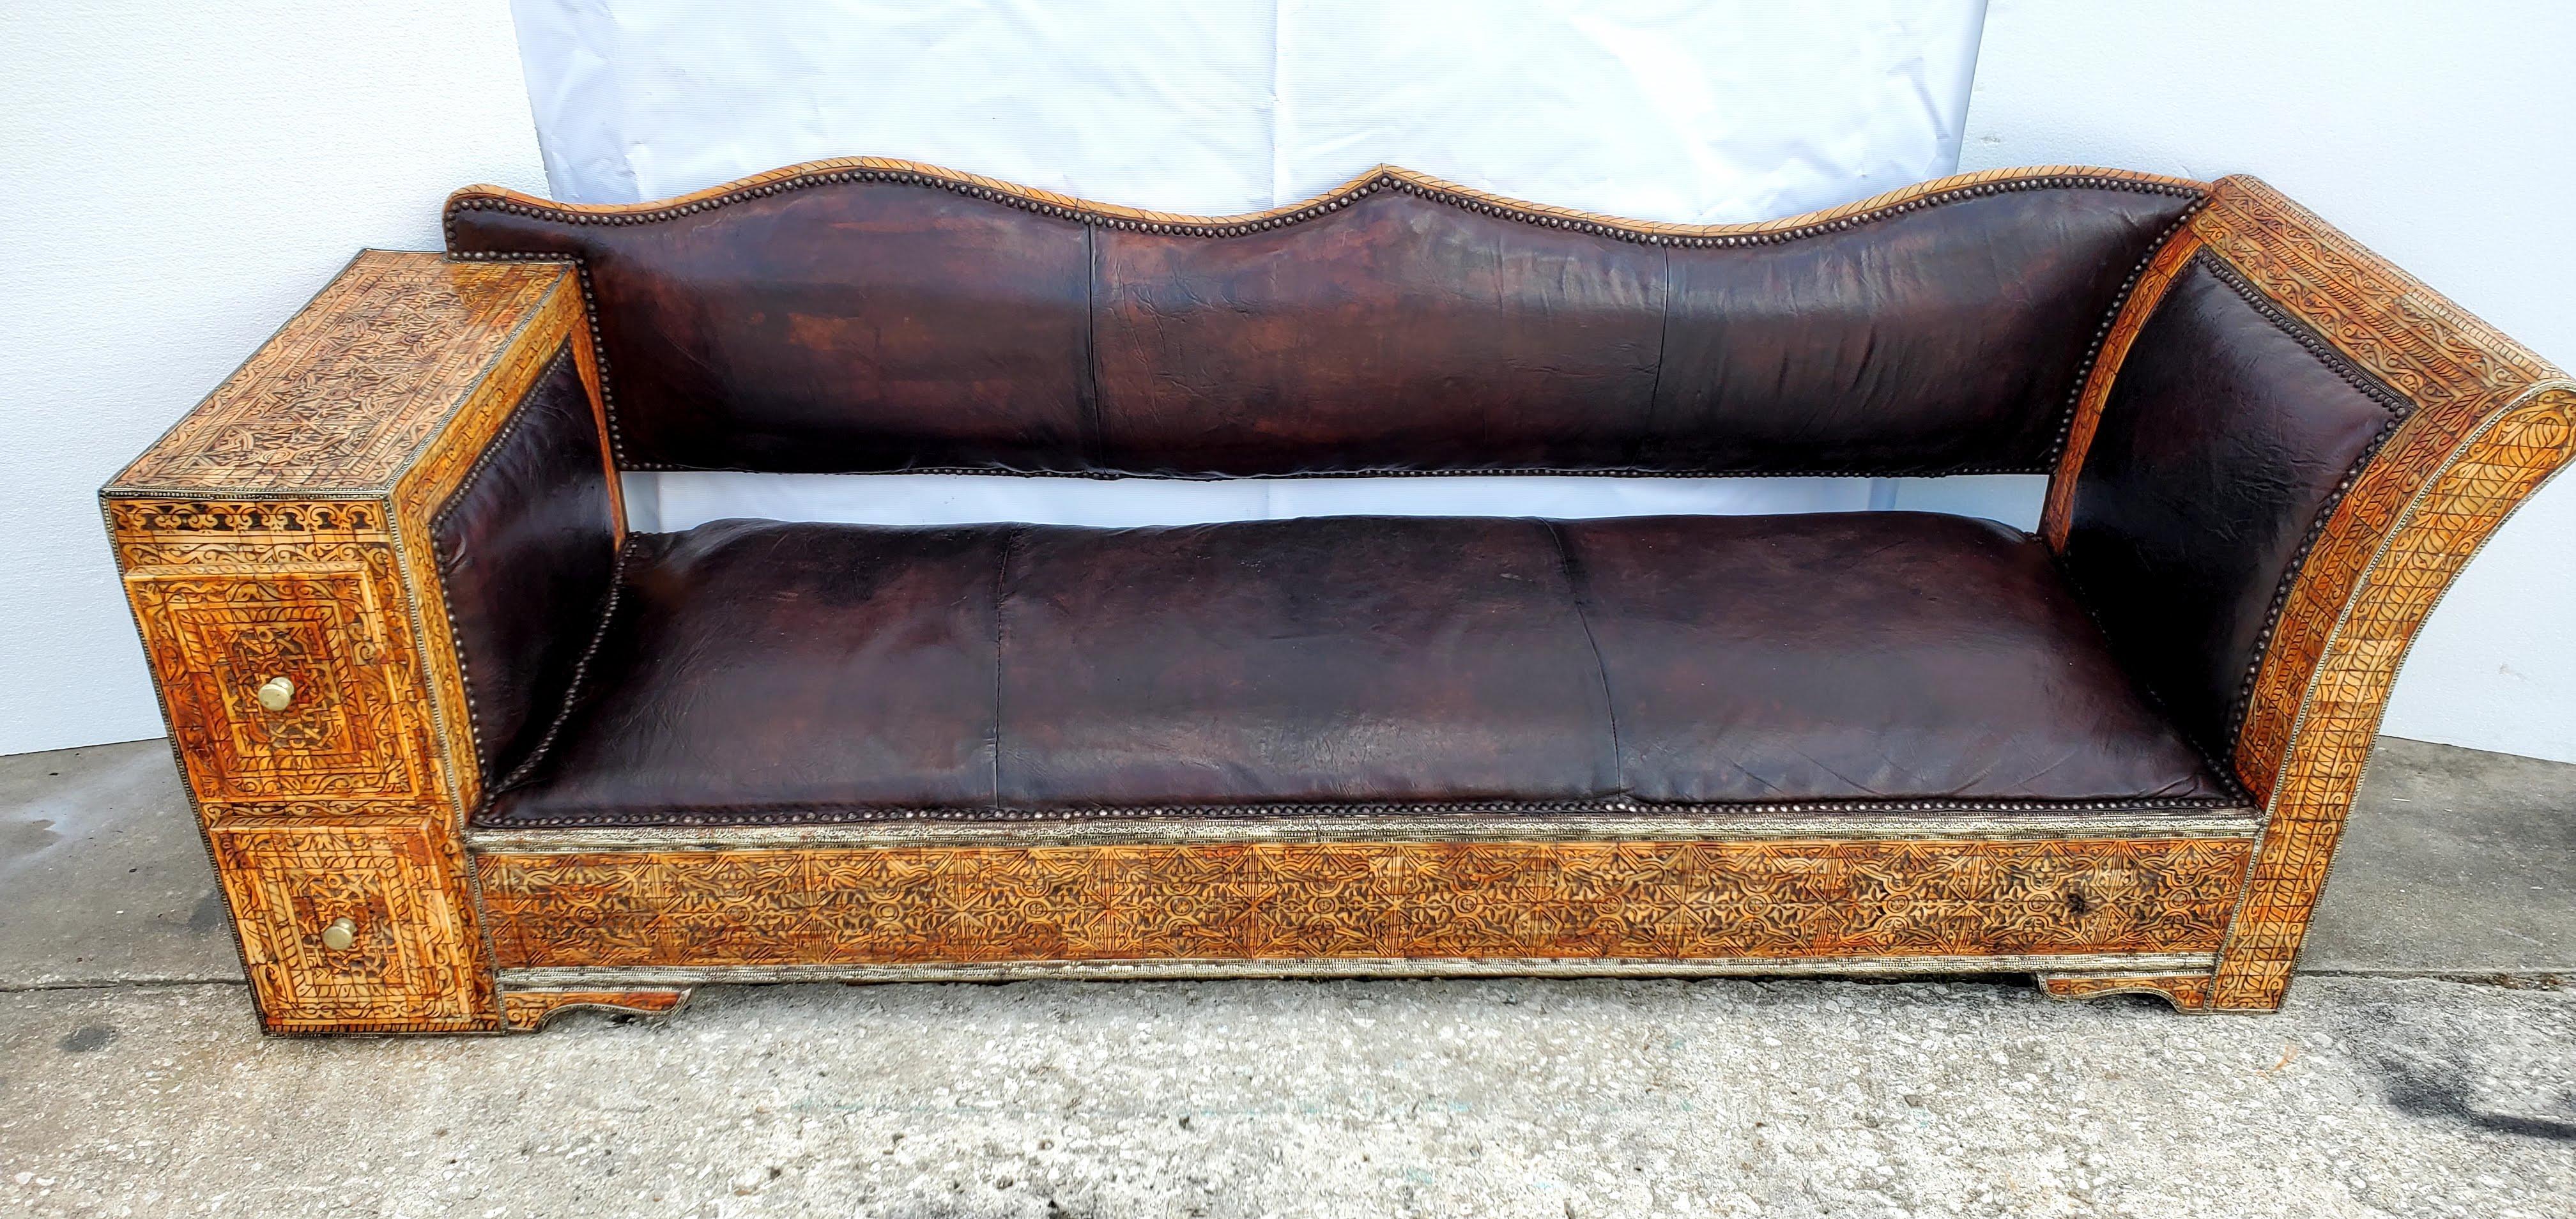 Rare and Unique Morocan Leather Sofa or Bench In Excellent Condition For Sale In West Palm Beach, FL